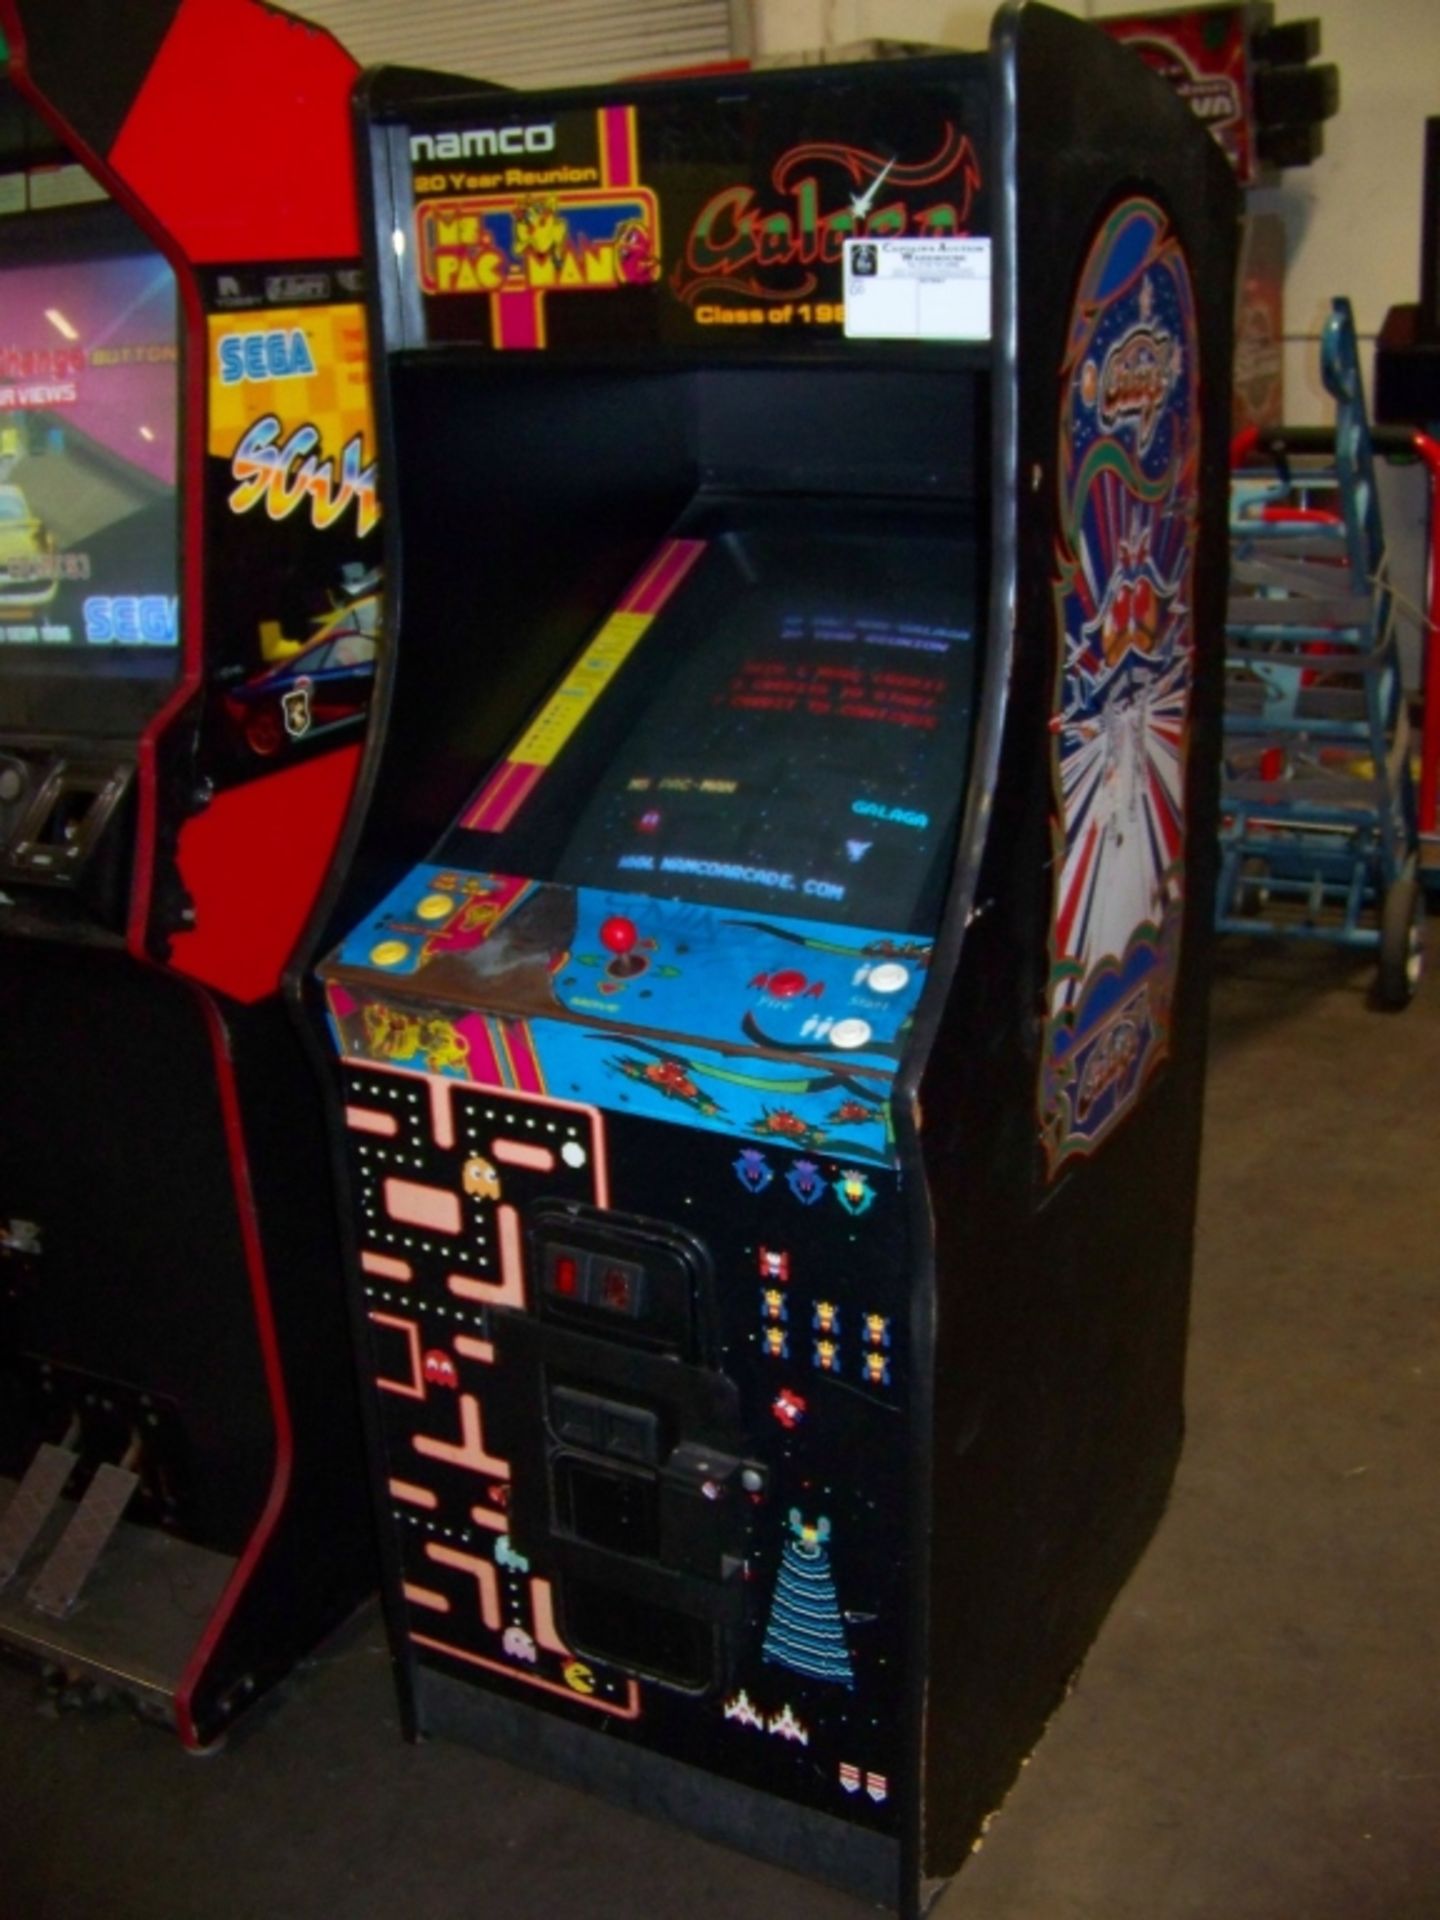 MS PACMAN GALAGA CLASS OF 1981 ARCADE GAME - Image 2 of 6